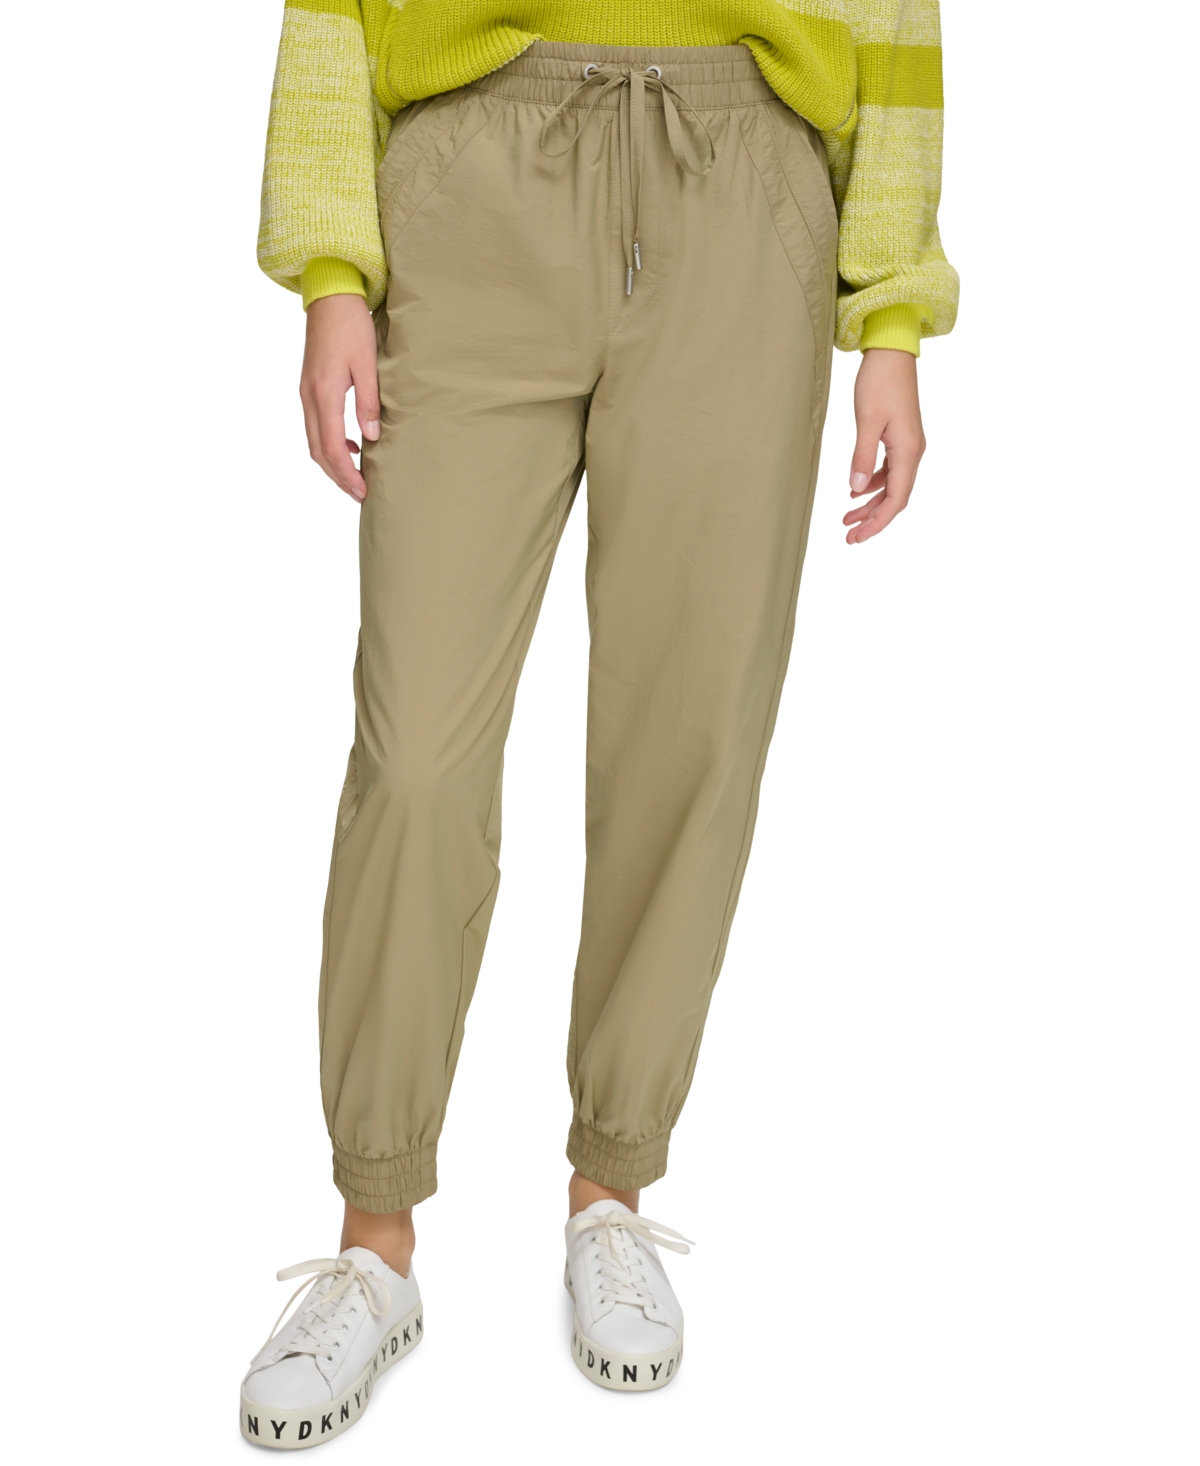 Dkny Jeans Women's Tie-waist Pull-on Jogger Pants In Gi - Lght Fatigue